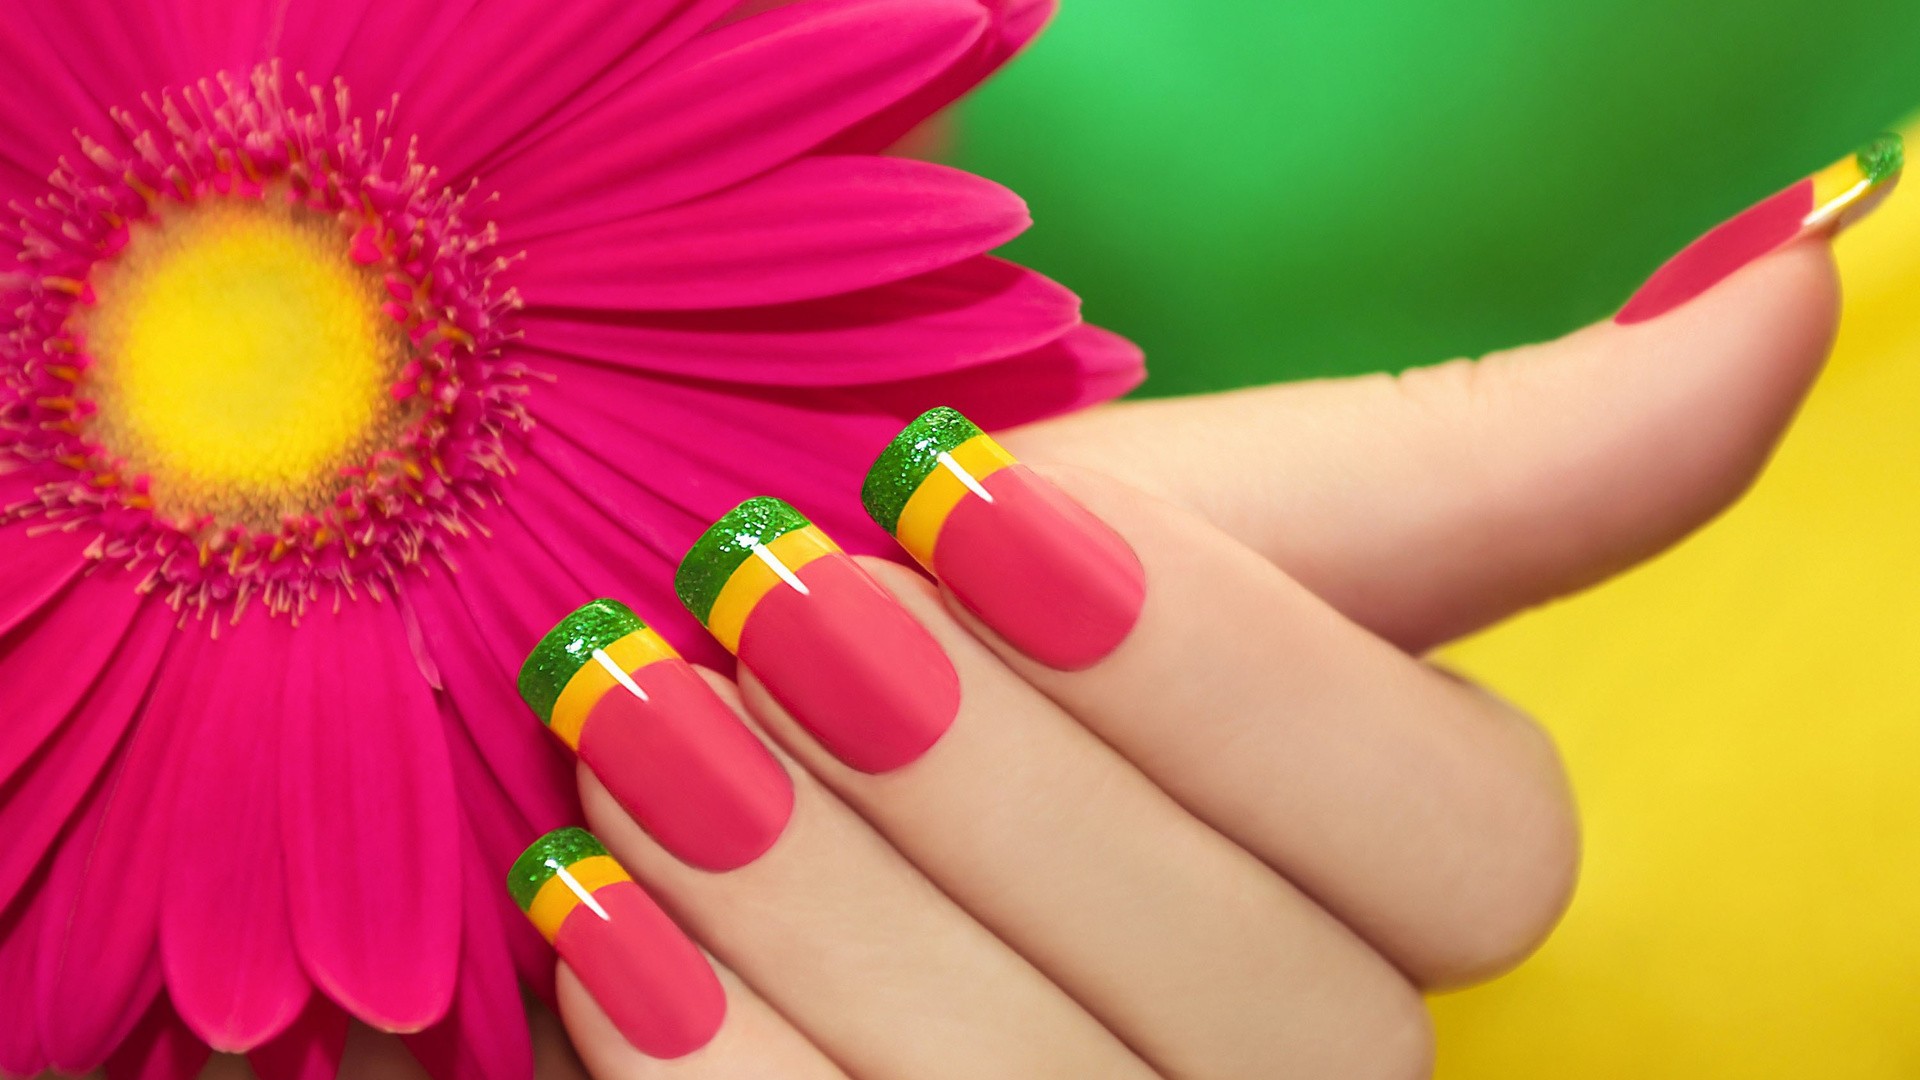 Colorful Flowers Hands Fingers Long Nails Depth Of Field Pink Nails Shiny Petals Acrylic Nails Manic 1920x1080